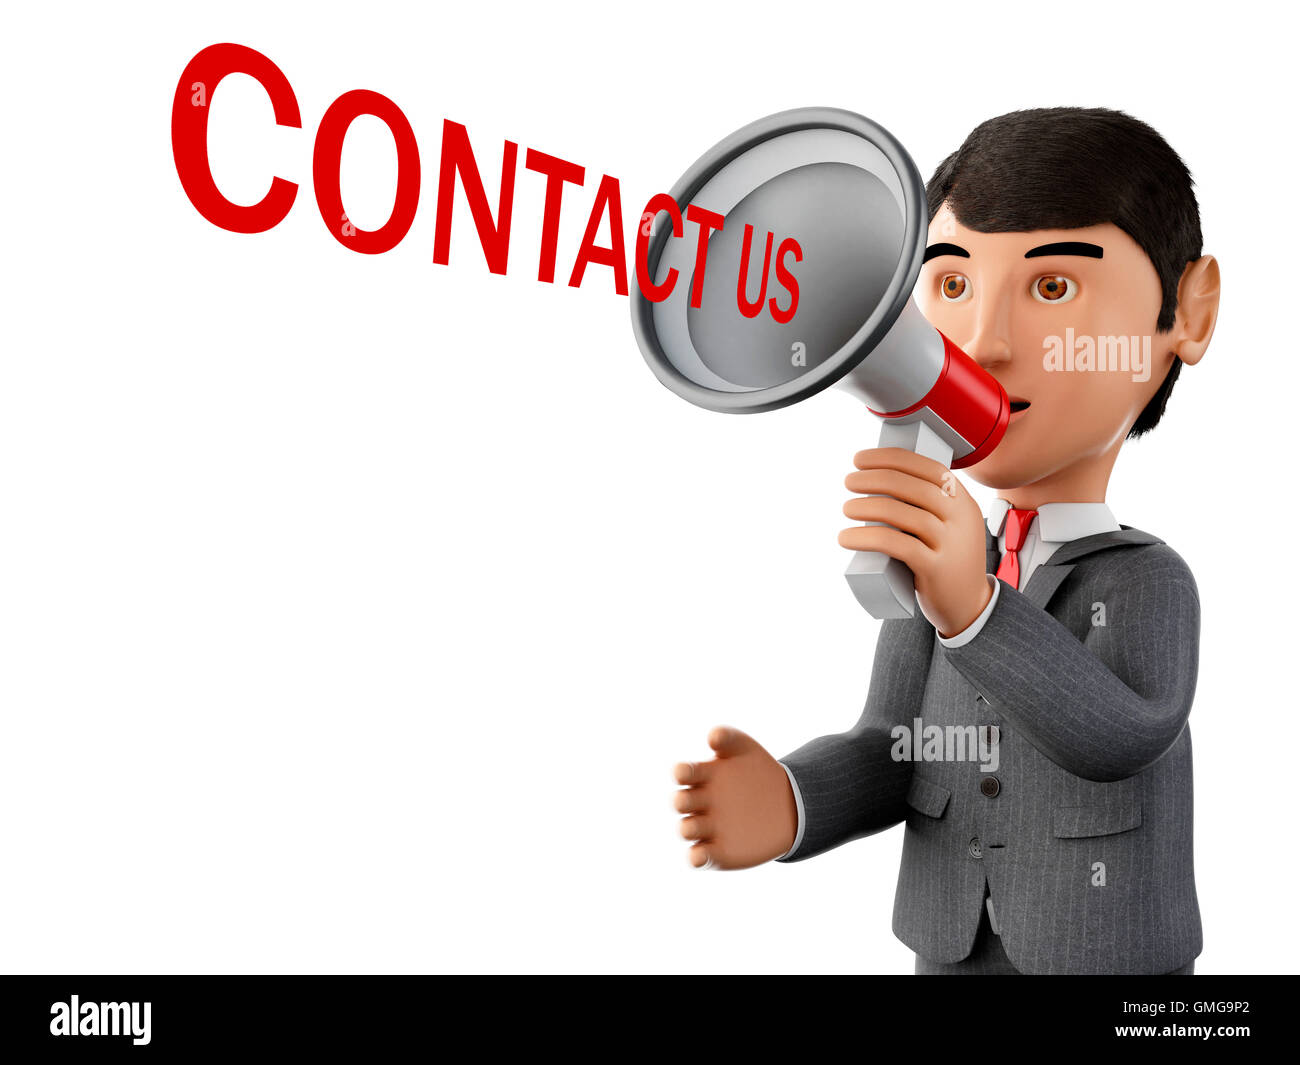 3d renderer image. usinessman with a megaphone and word contact us. Business concept. Isolated white background. Stock Photo